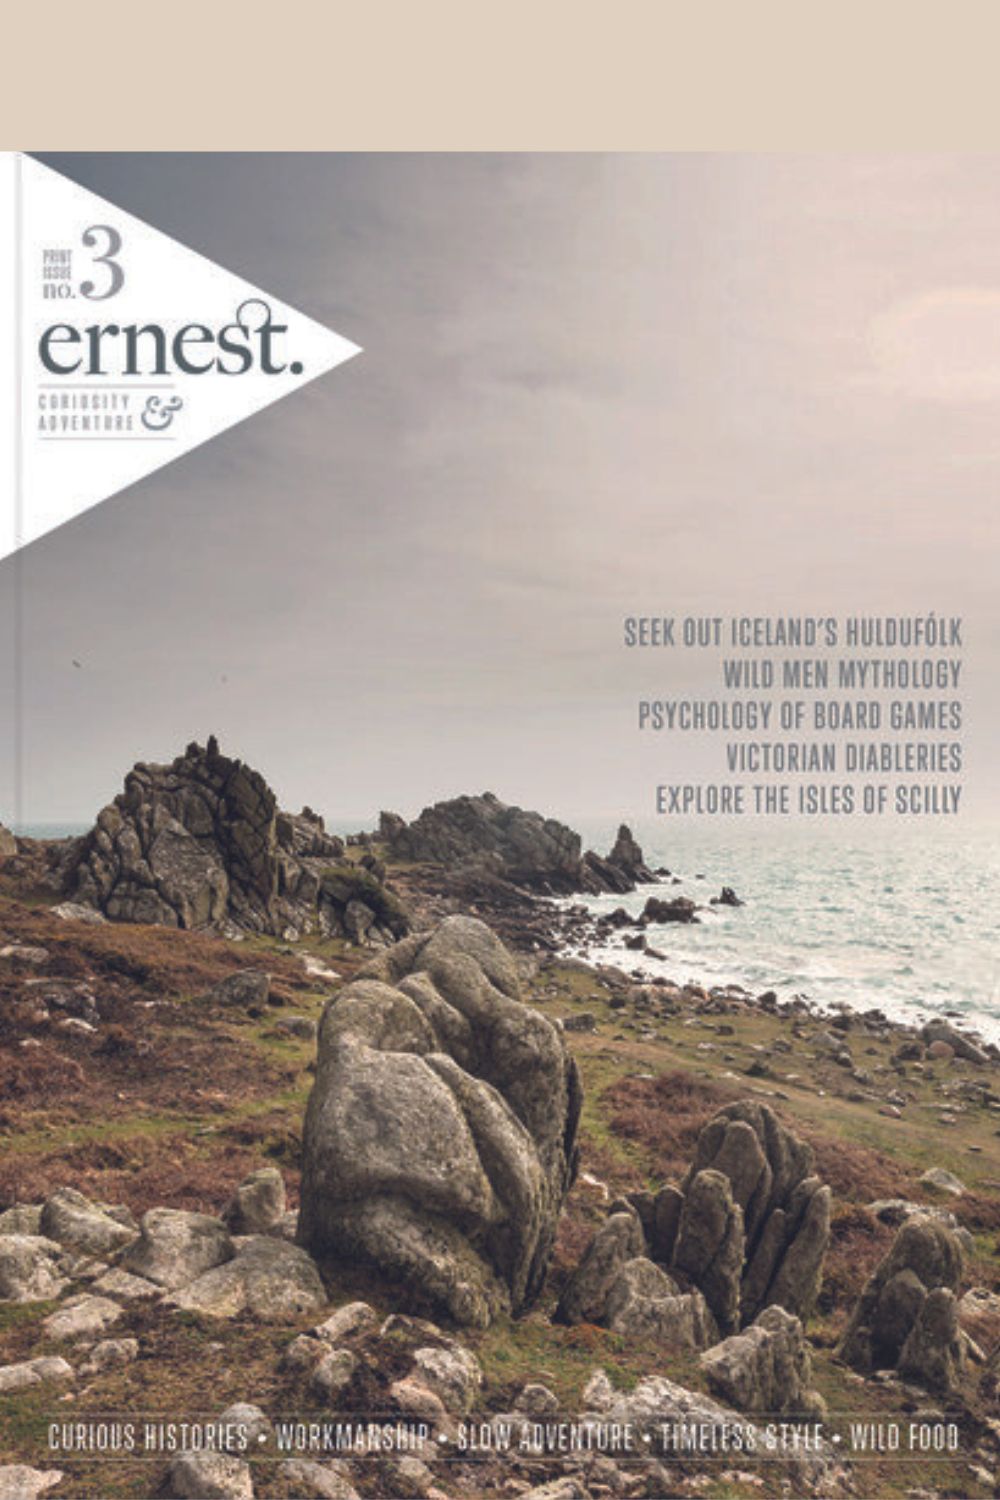 Ernest Journal Issue 3 cover with rocky shoreline background